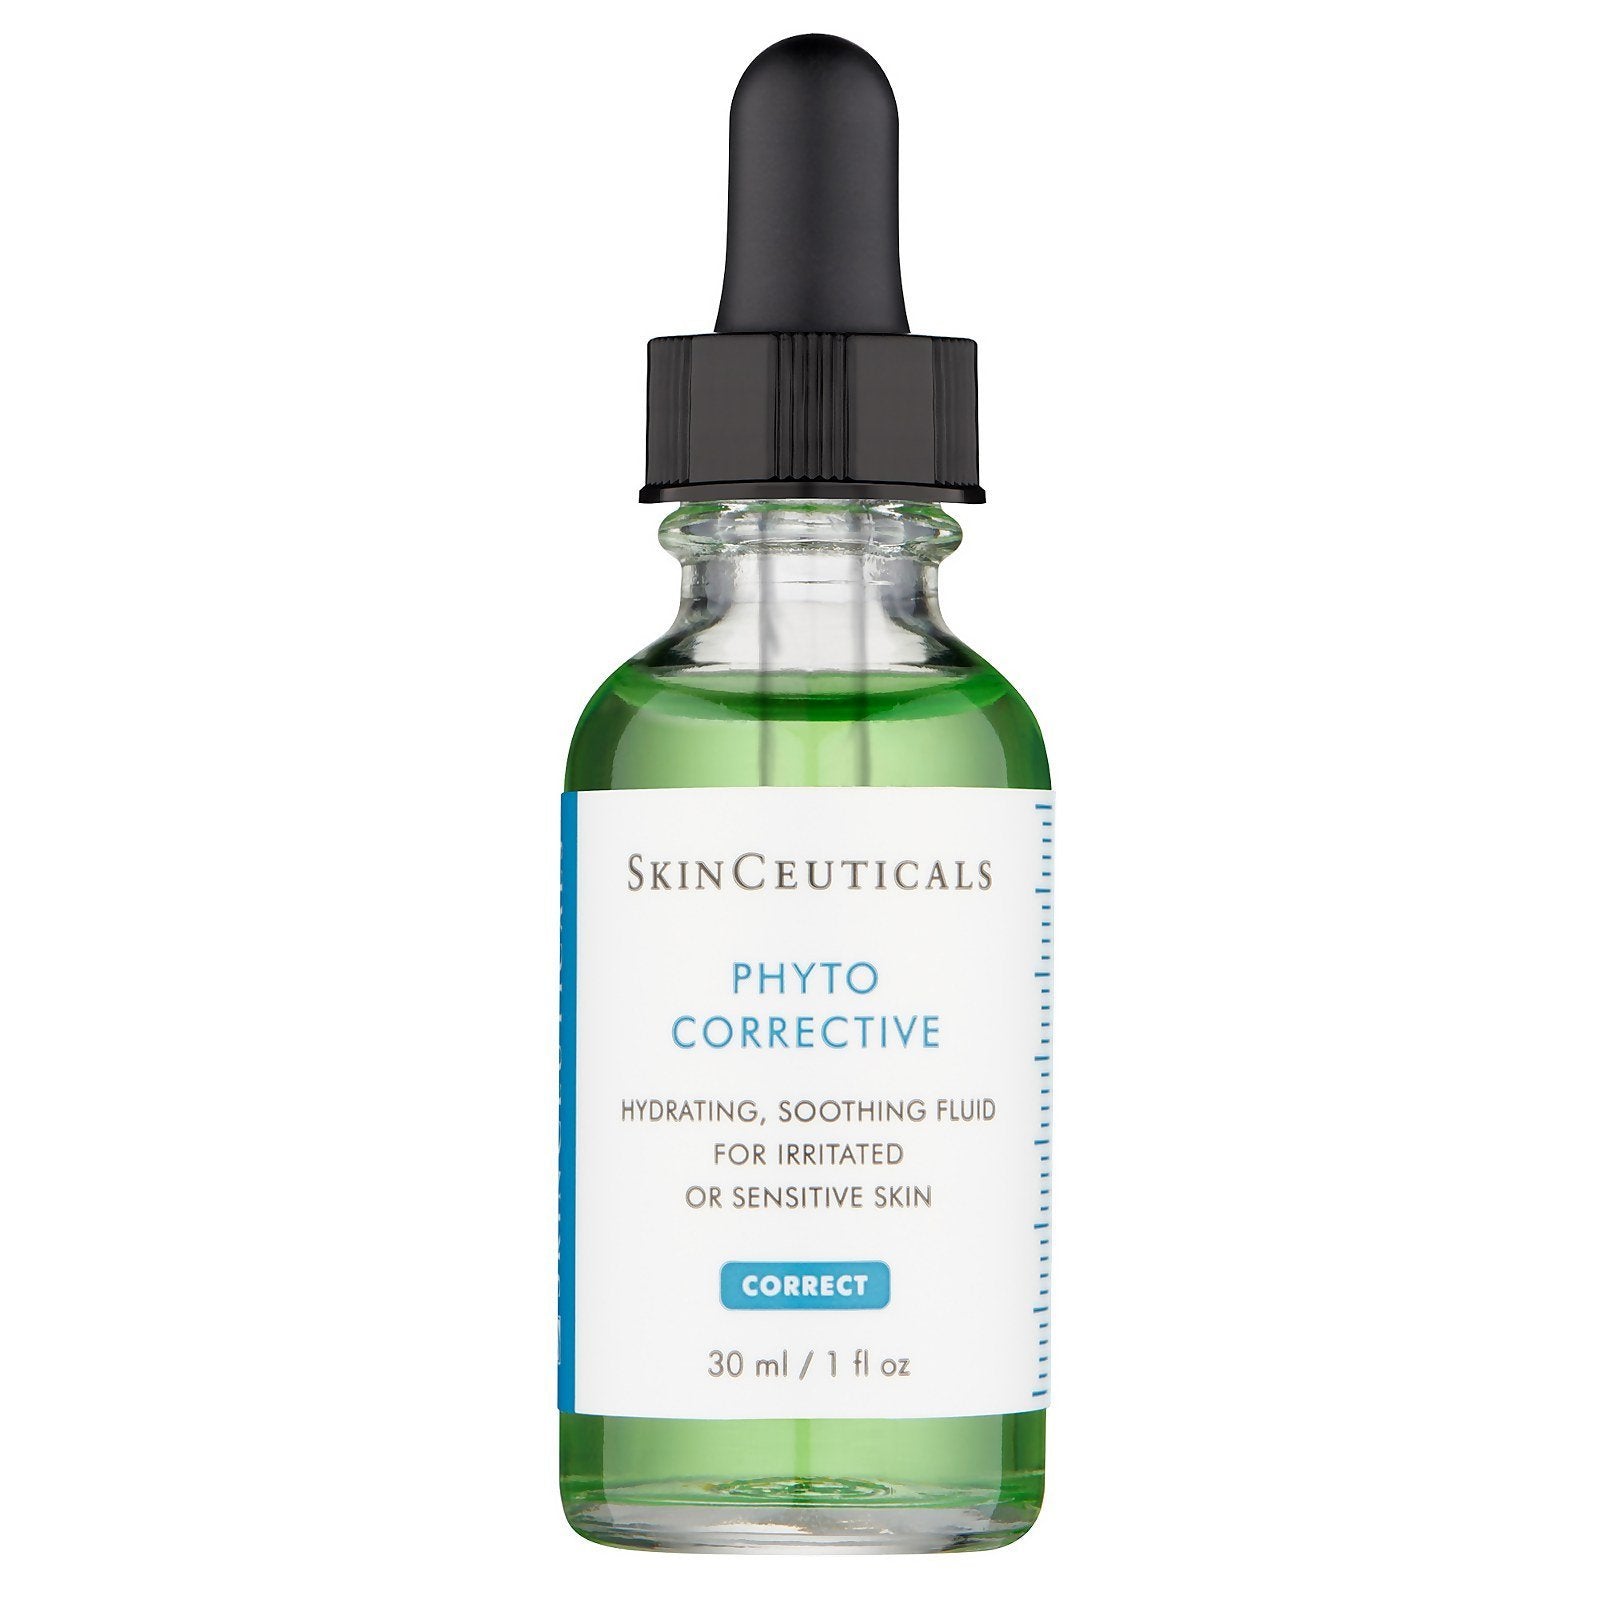 SkinCeuticals Phyto Corrective SkinShop.ie